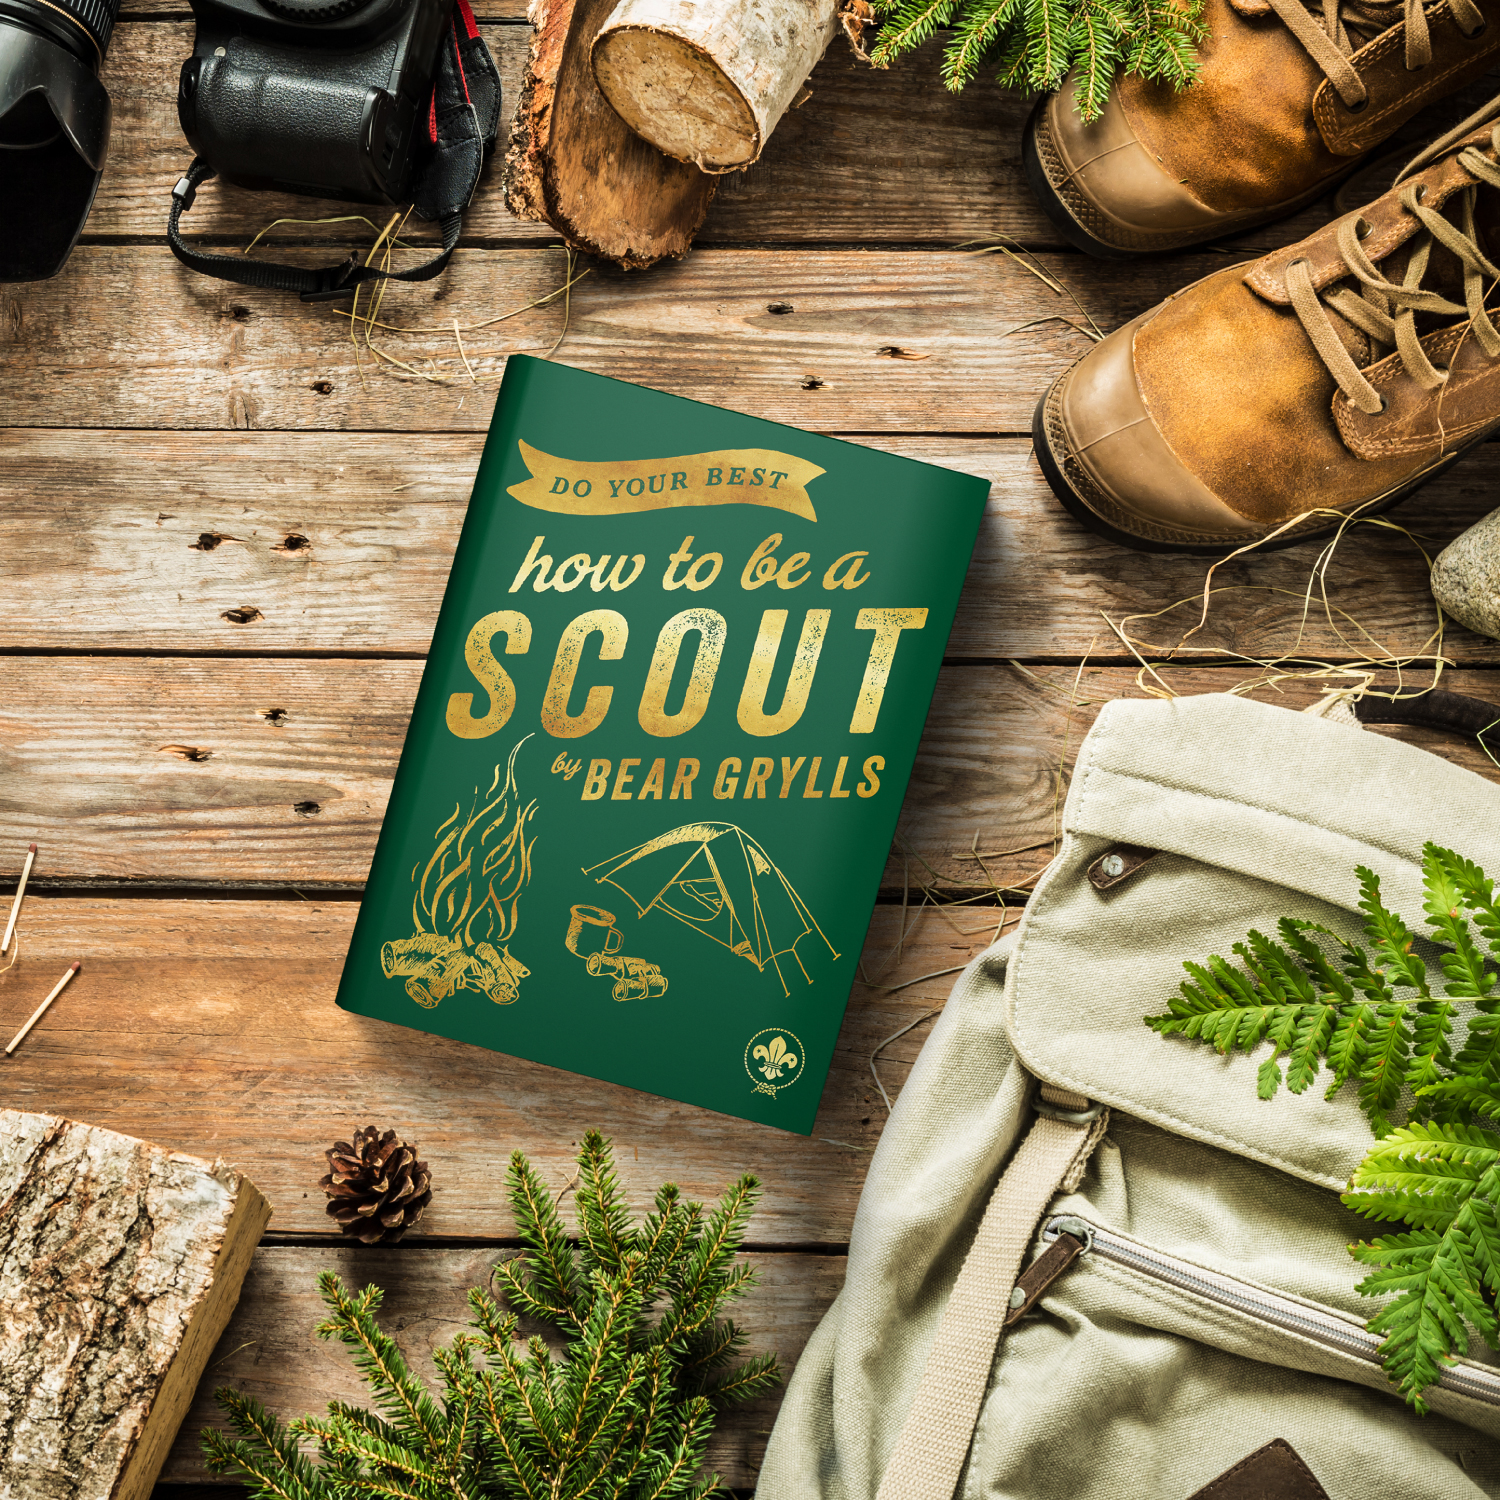 Bear Grylls' book 'Do Your Best: How to be a Scout' is pictured on wood surrounded by leaves, a backpack, a brown book, a camera and logs.